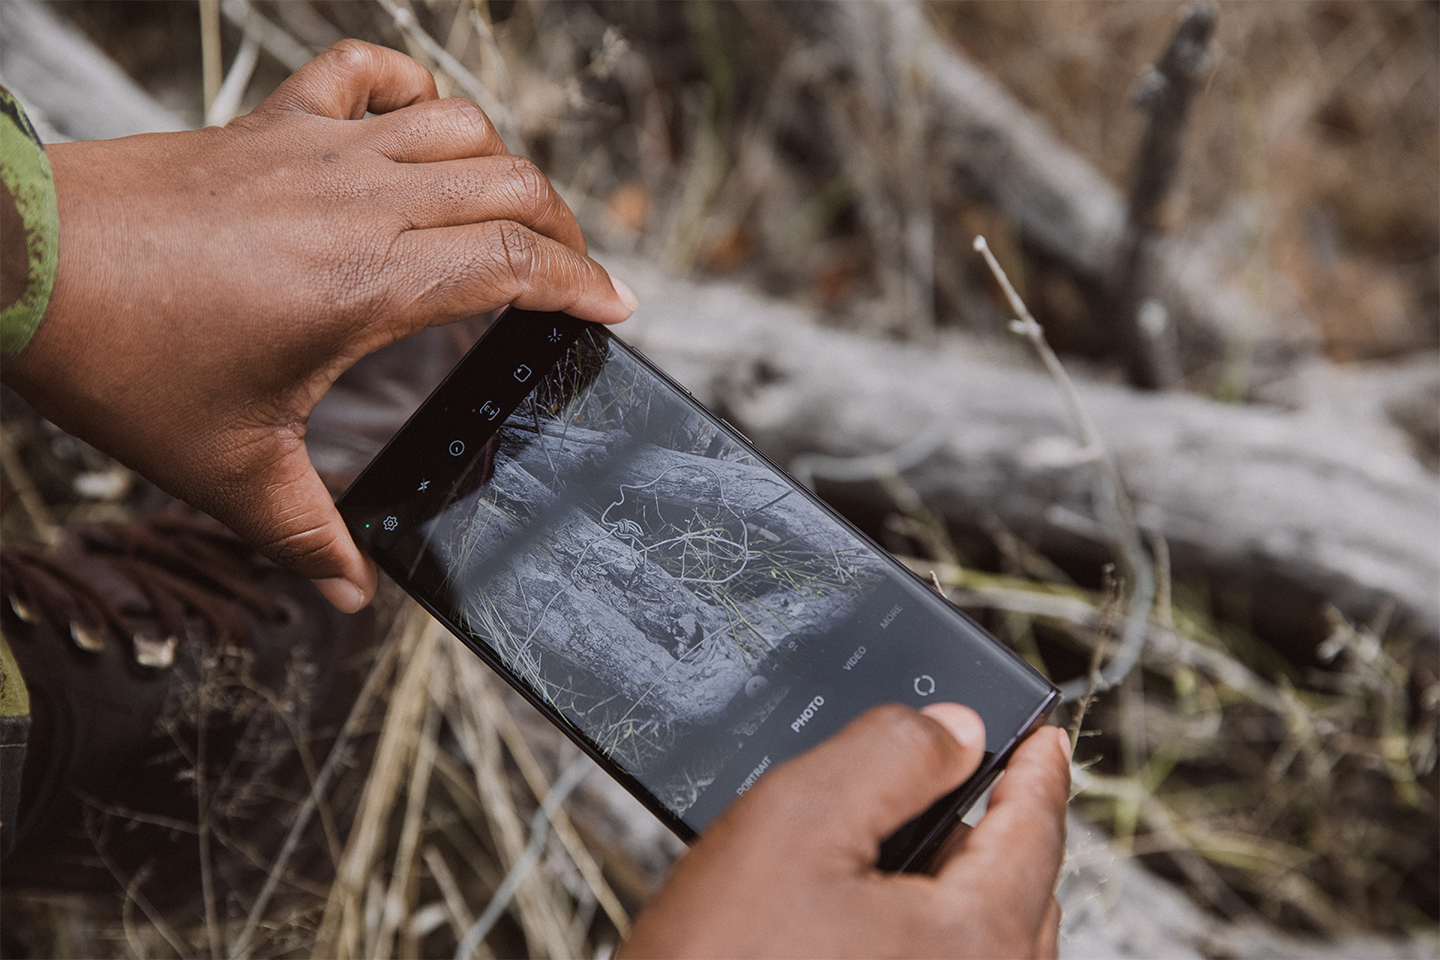 Samsung Expands Wildlife Watch Programme to Help Protect Against Animal Poaching in the South African Bush